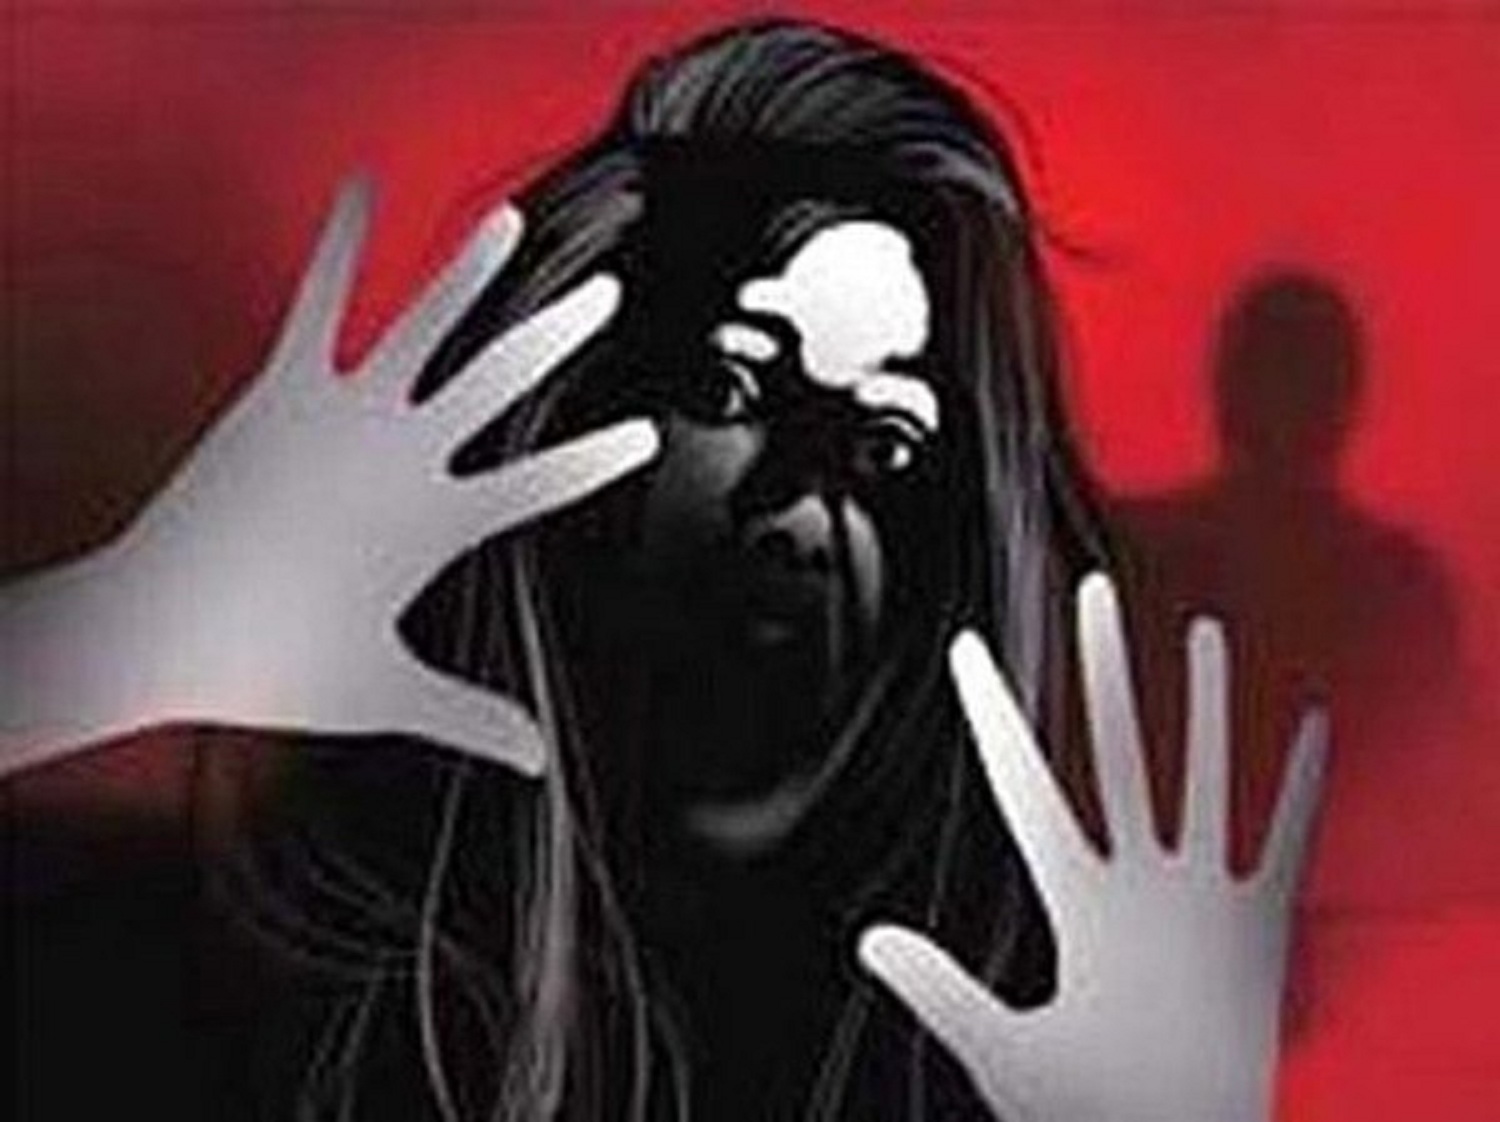 Son raped mother in Bareilly, Son raped mother, Bareilly News, Crime News Bareilly, Rape in Bareilly, Rape in Uttar Pradesh, crime news Uttar Pradesh, Latest News Bareilly, Hinfi News Bareilly, TIS Media